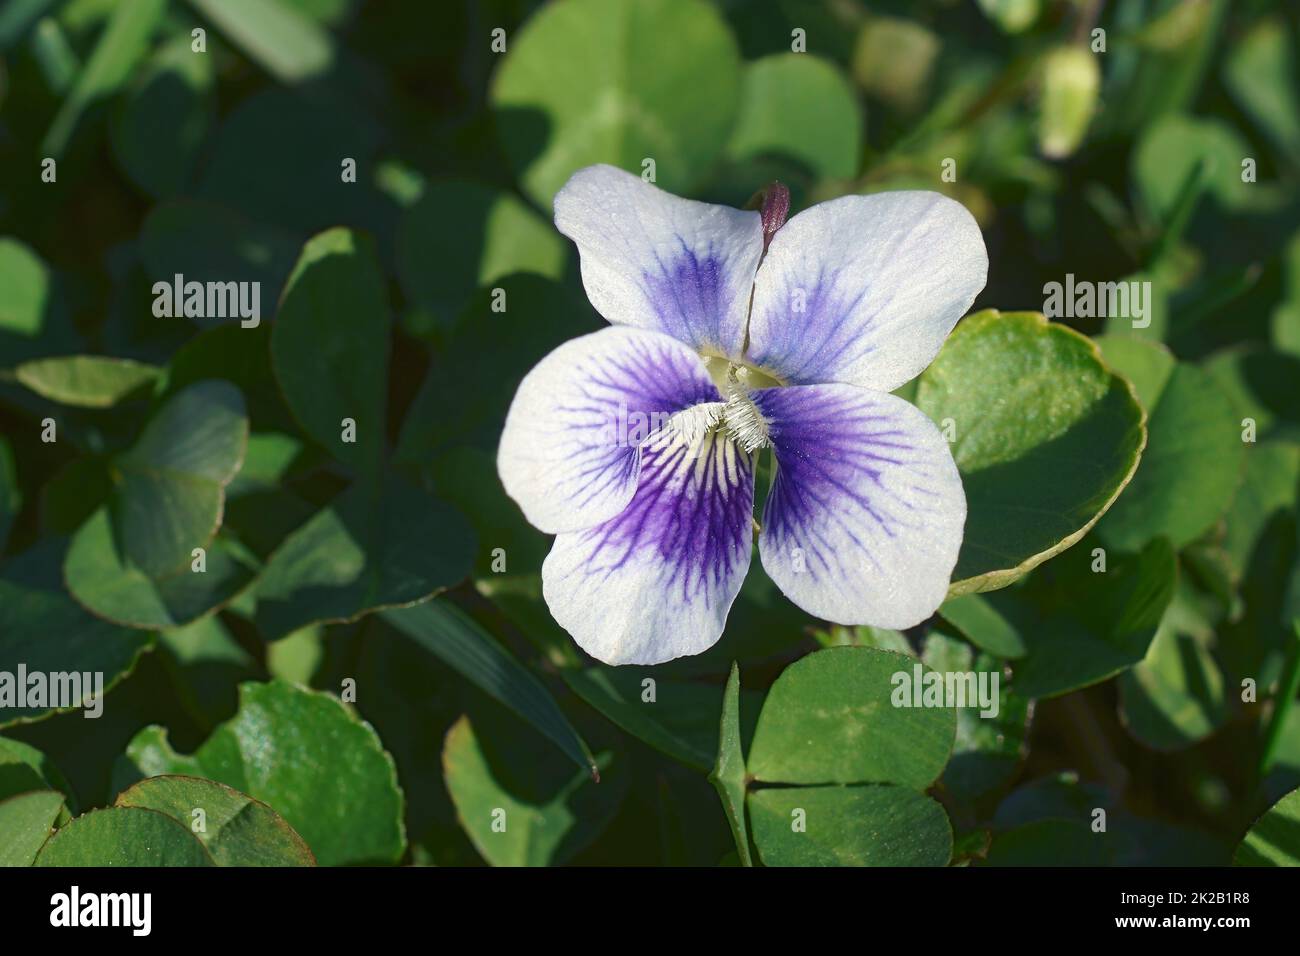 Close-up image of Common blue violet flower Stock Photo